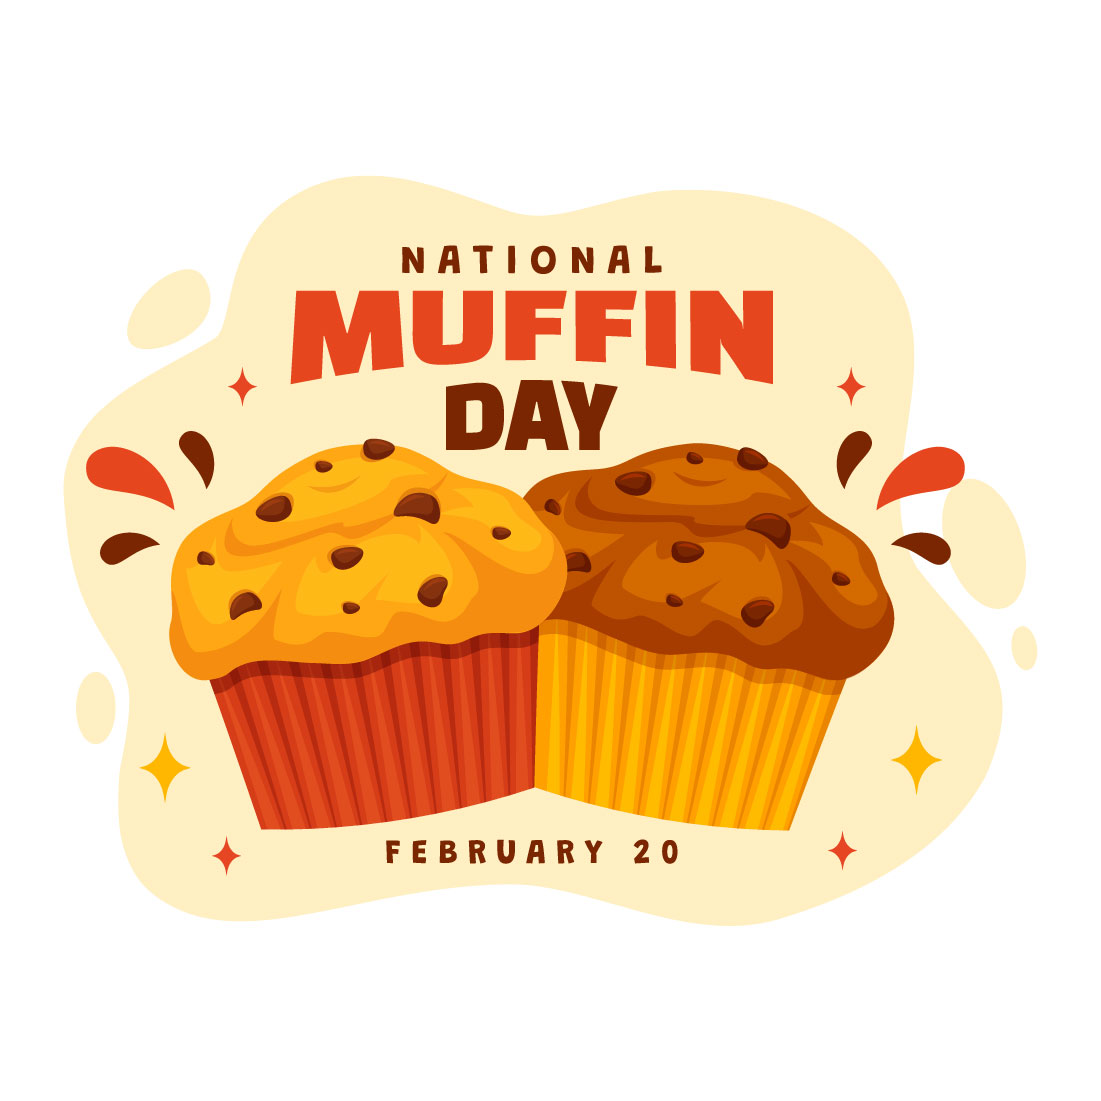 12 National Muffin Day Illustration cover image.